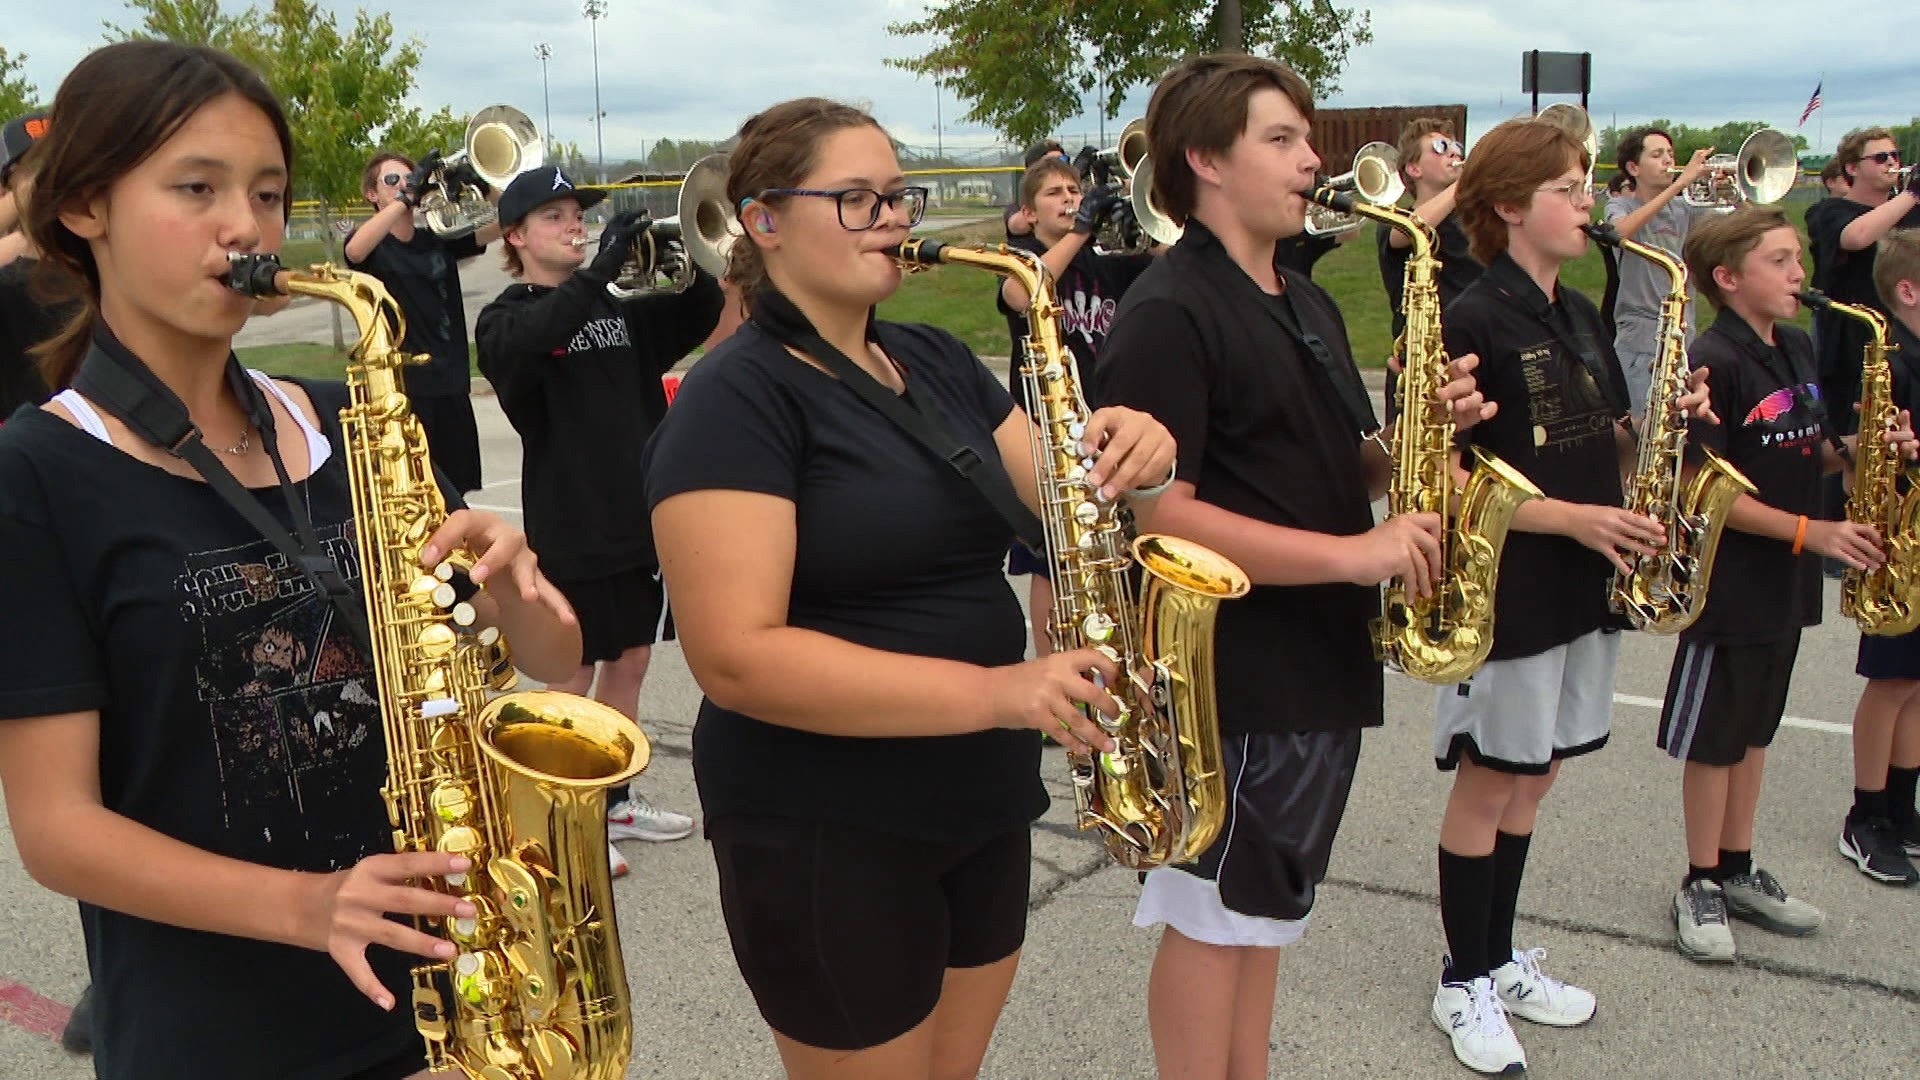 Fishers High School band performs as part of Operation Football's Band of the Week.